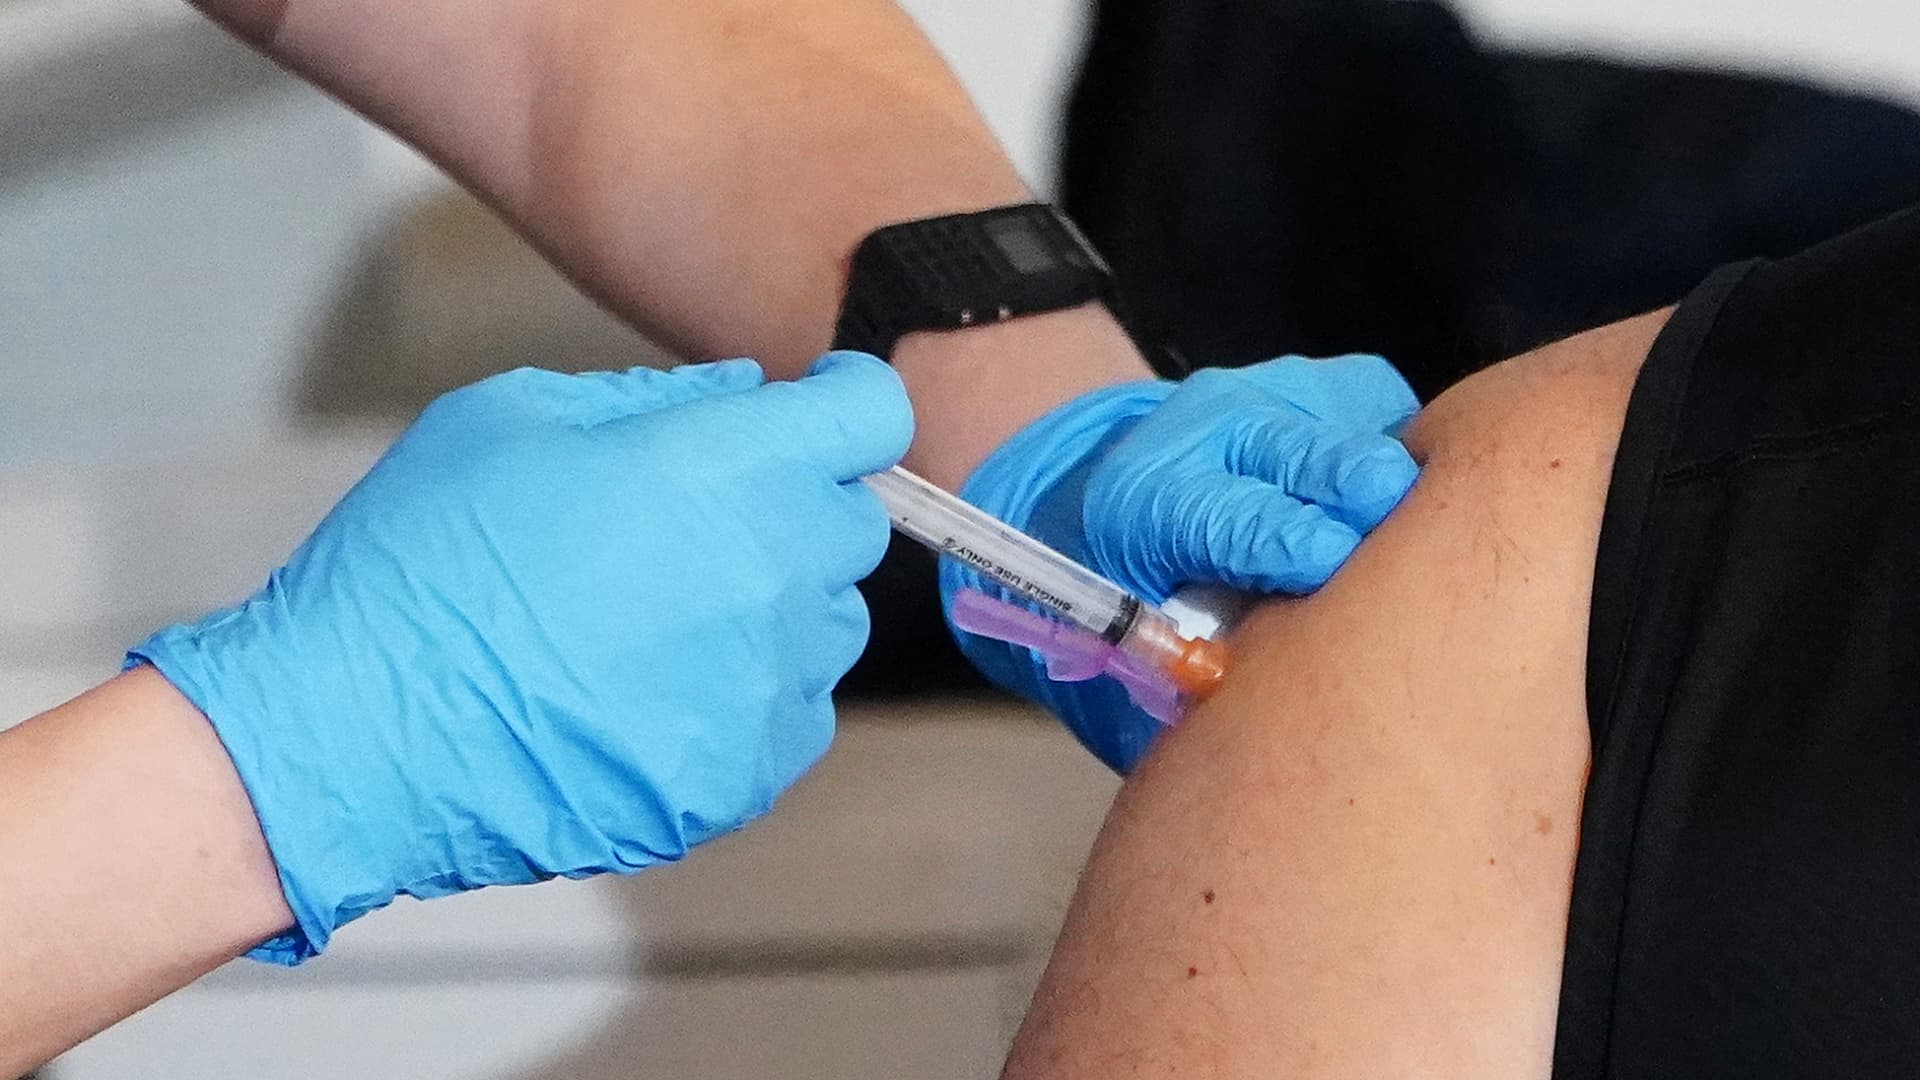 A worker of the New York City Fire Department Bureau of Emergency Medical Services (FDNY EMS) receives a COVID-19 Moderna vaccine, amid the coronavirus disease (COVID-19) pandemic in New York, December 23, 2020.